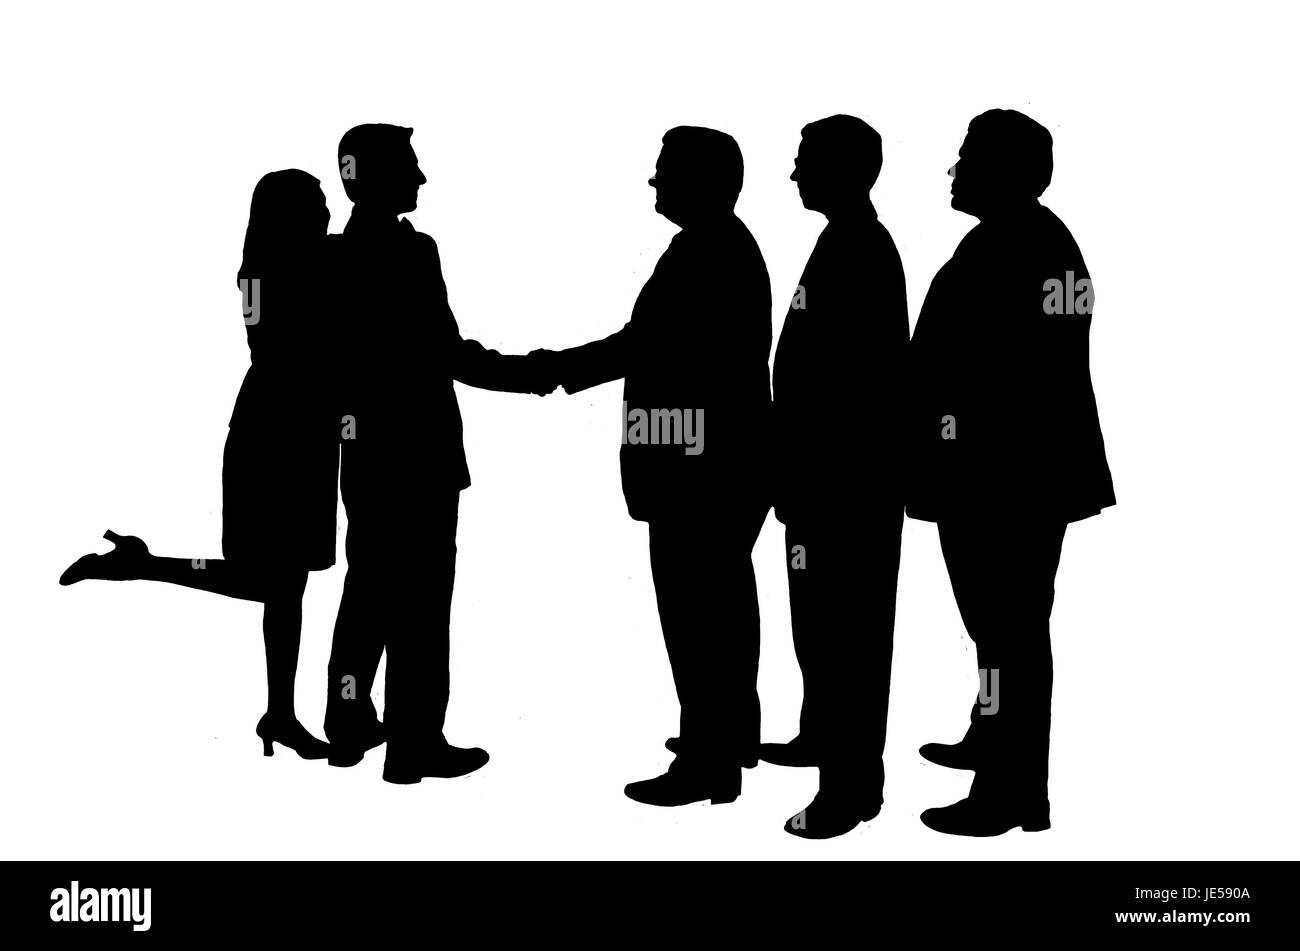 Silhouetted businessmen in a shaking hand pose. Stock Photo